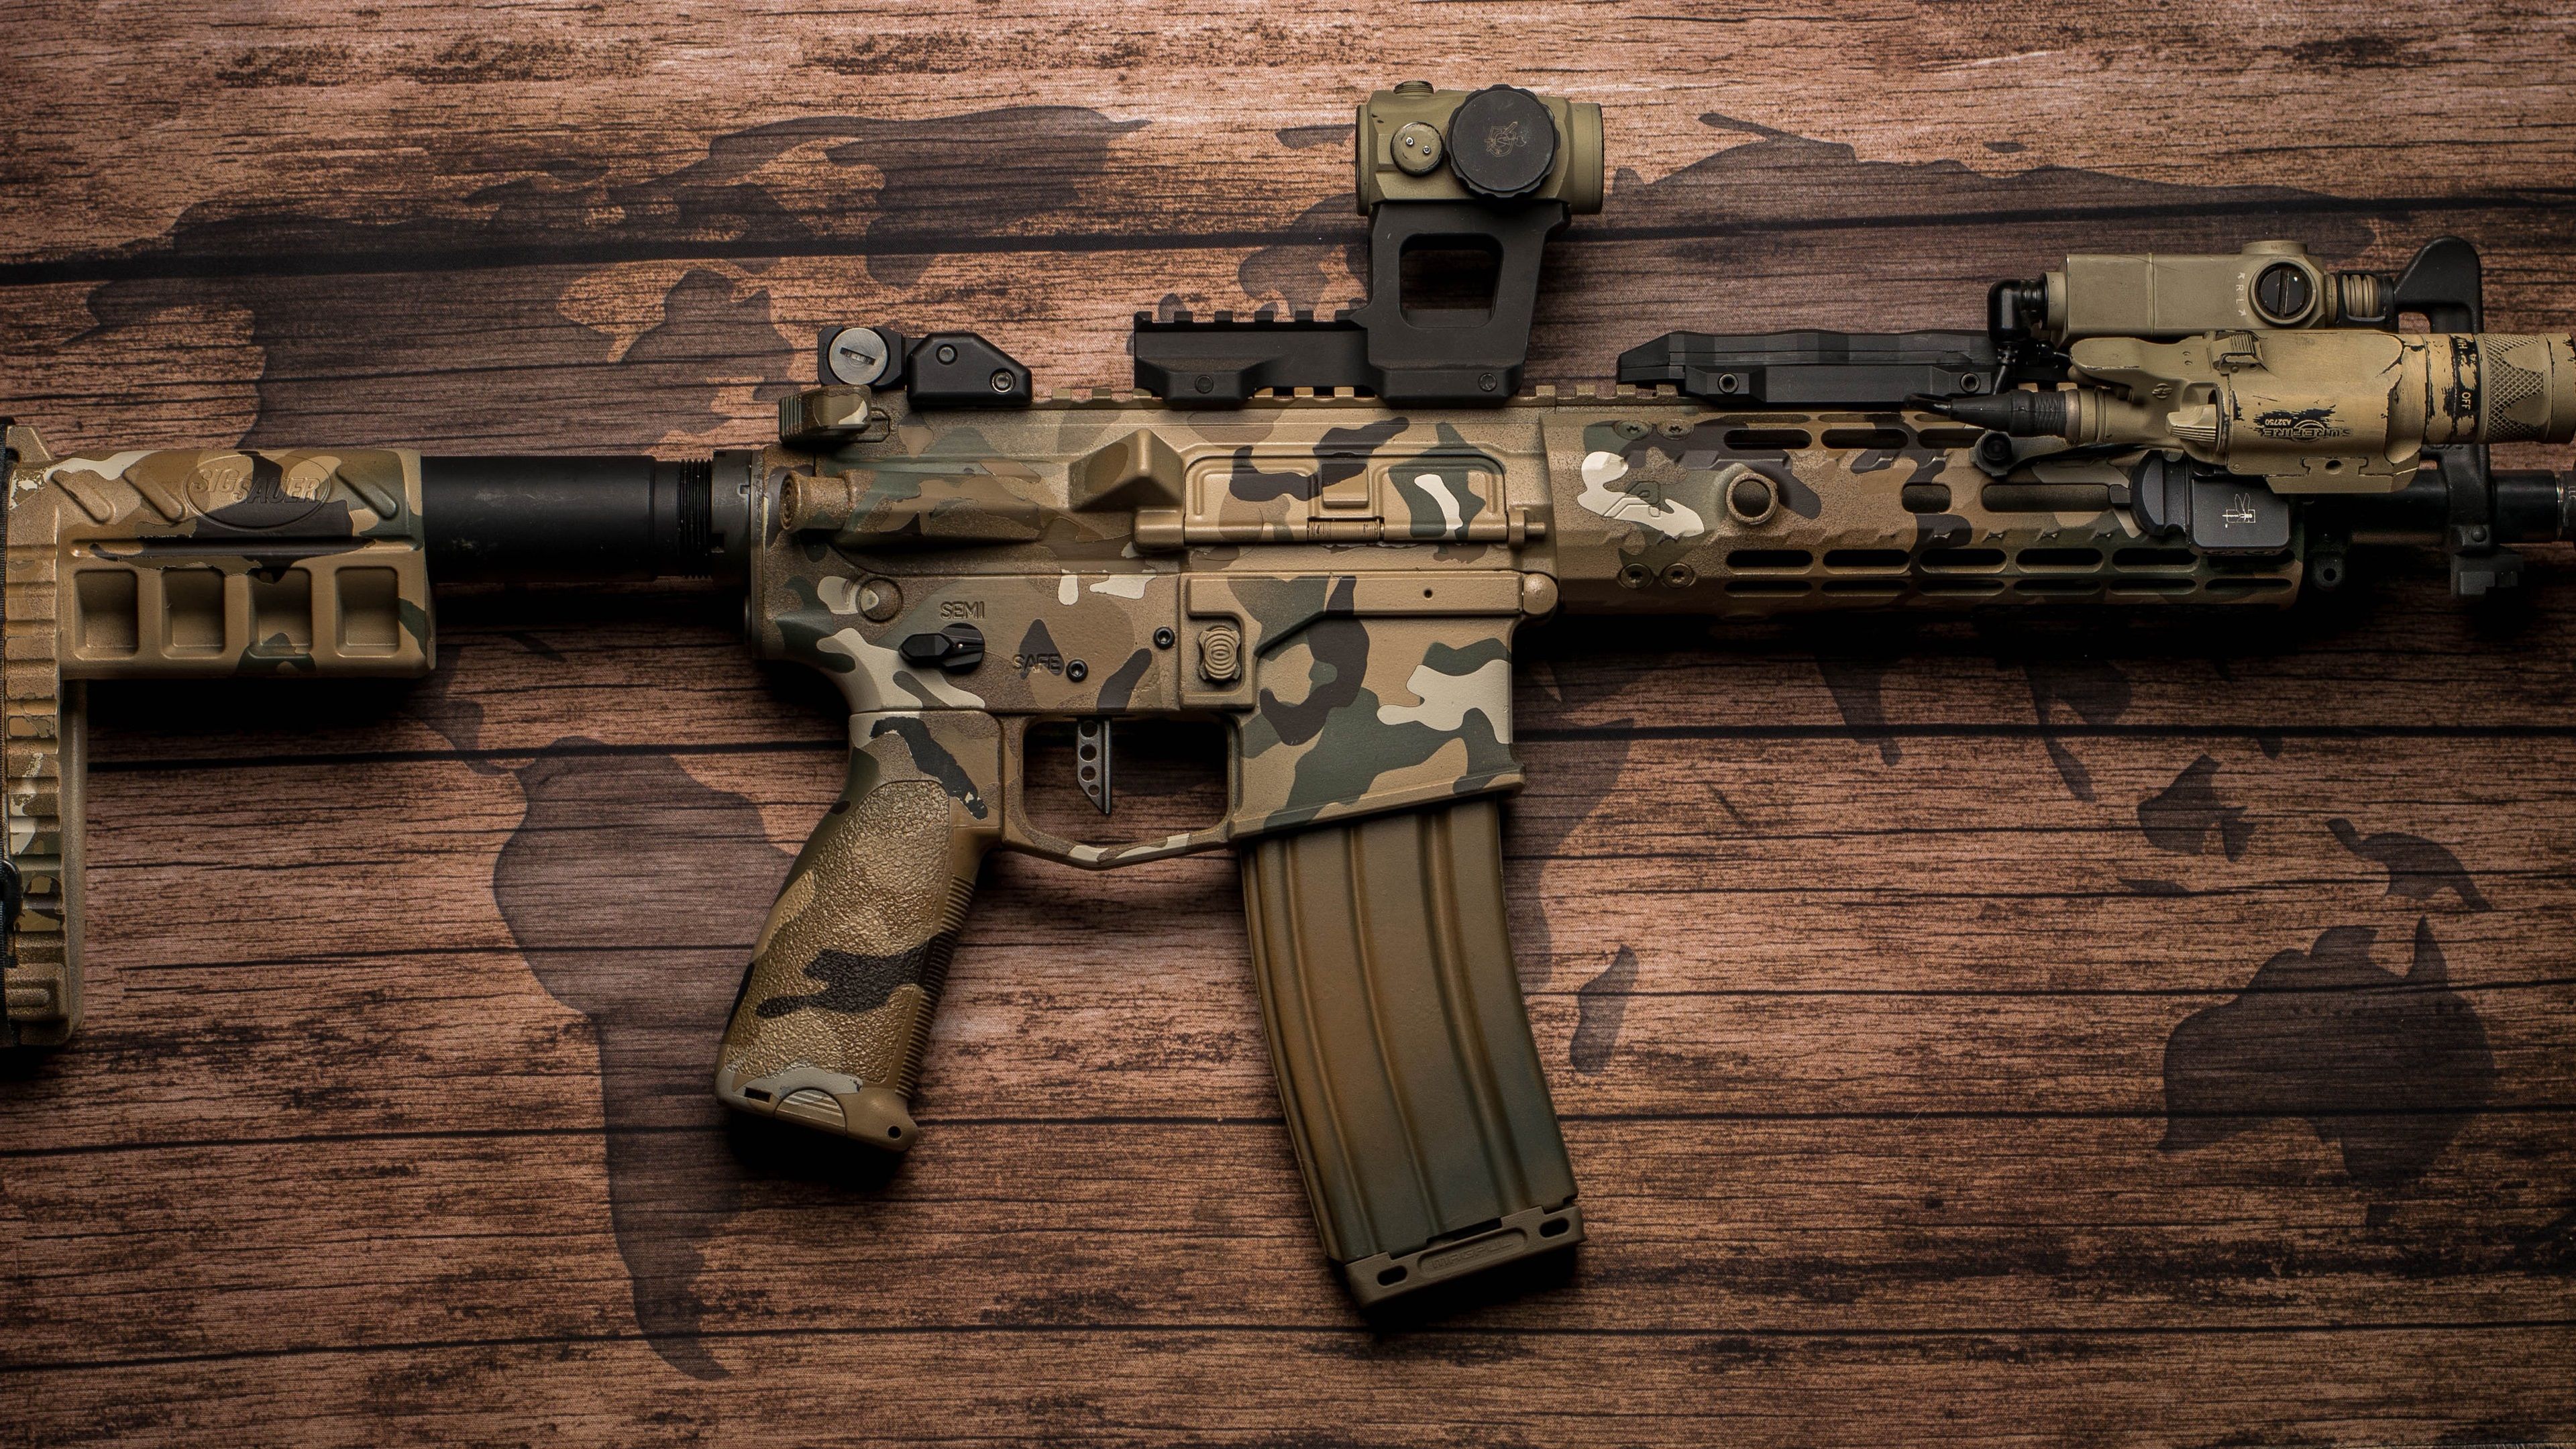 Ar15 Pictures  Download Free Images on Unsplash